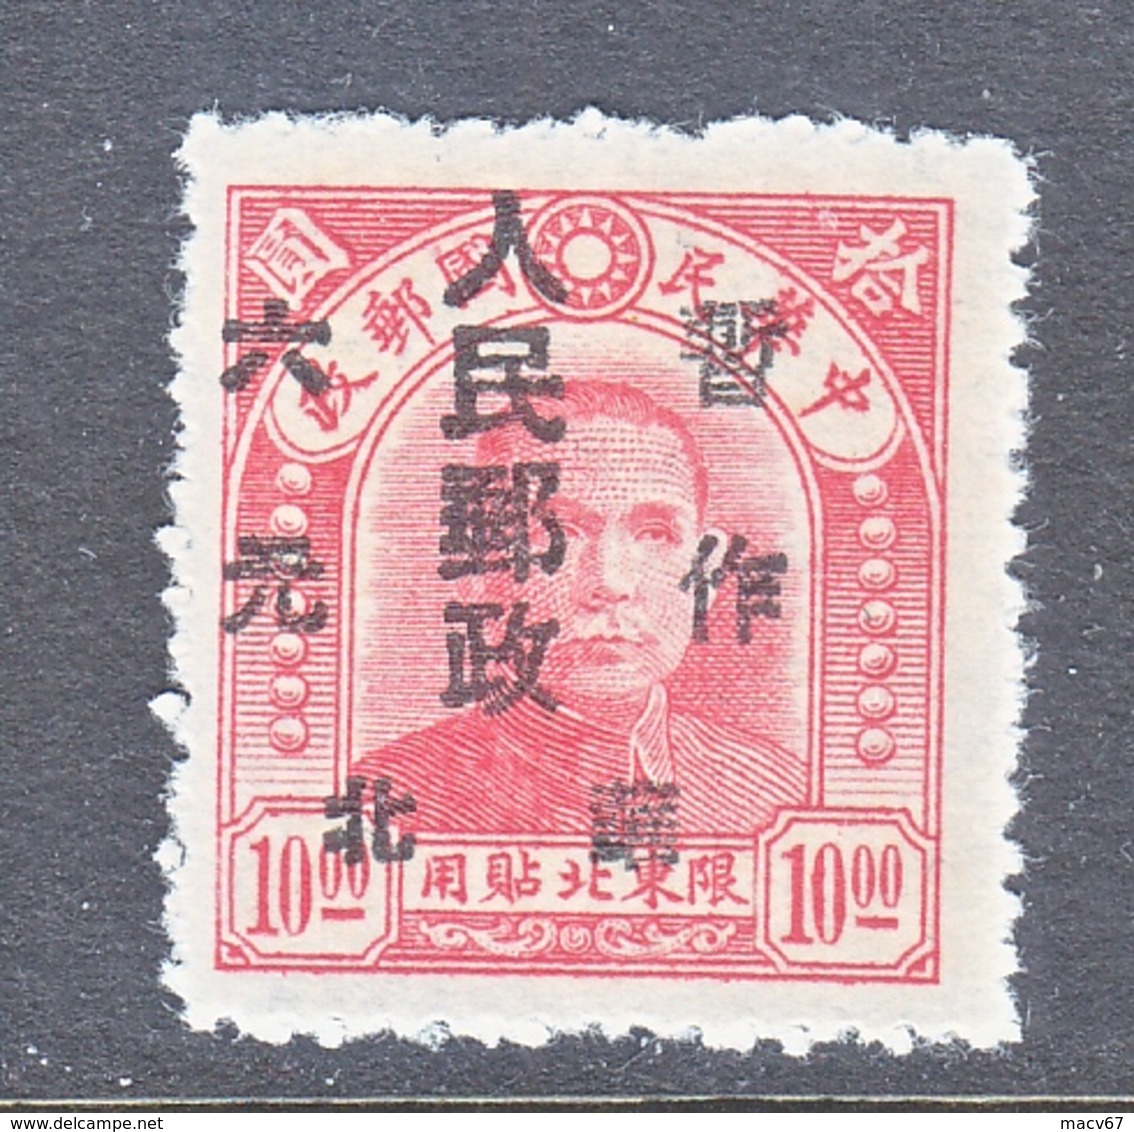 PRC  NORTH  CHINA   3 L 58 A  TYPE  II   *  LIBERATED  AREA - Central China 1948-49